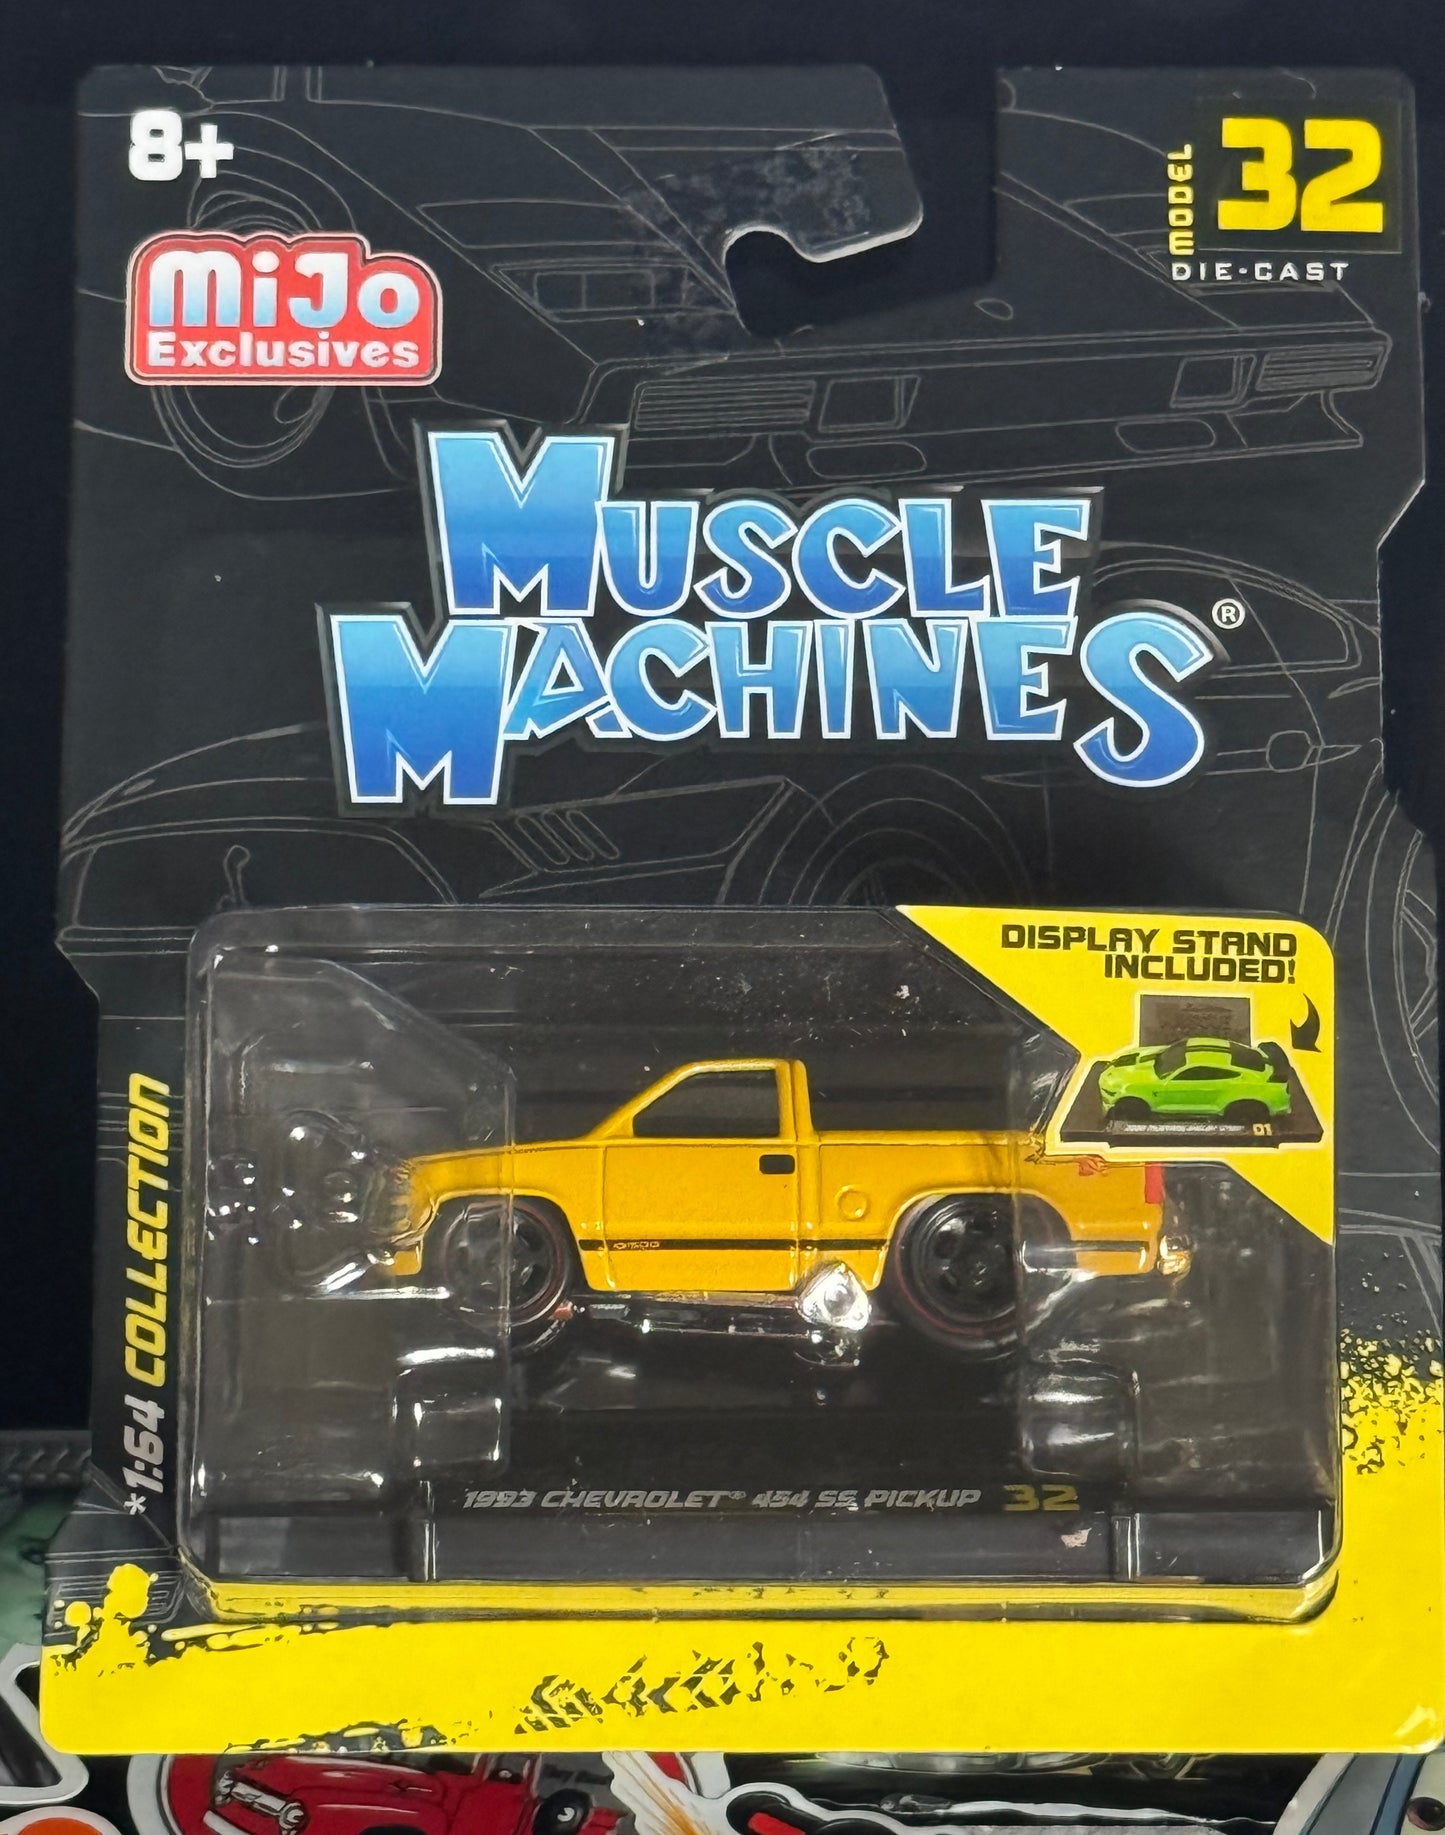 Maisto Muscle Machines 1:64 1993 Chevrolet 454 SS Pickup Truck #32 Yellow with Black Stripes Mijo Exclusives